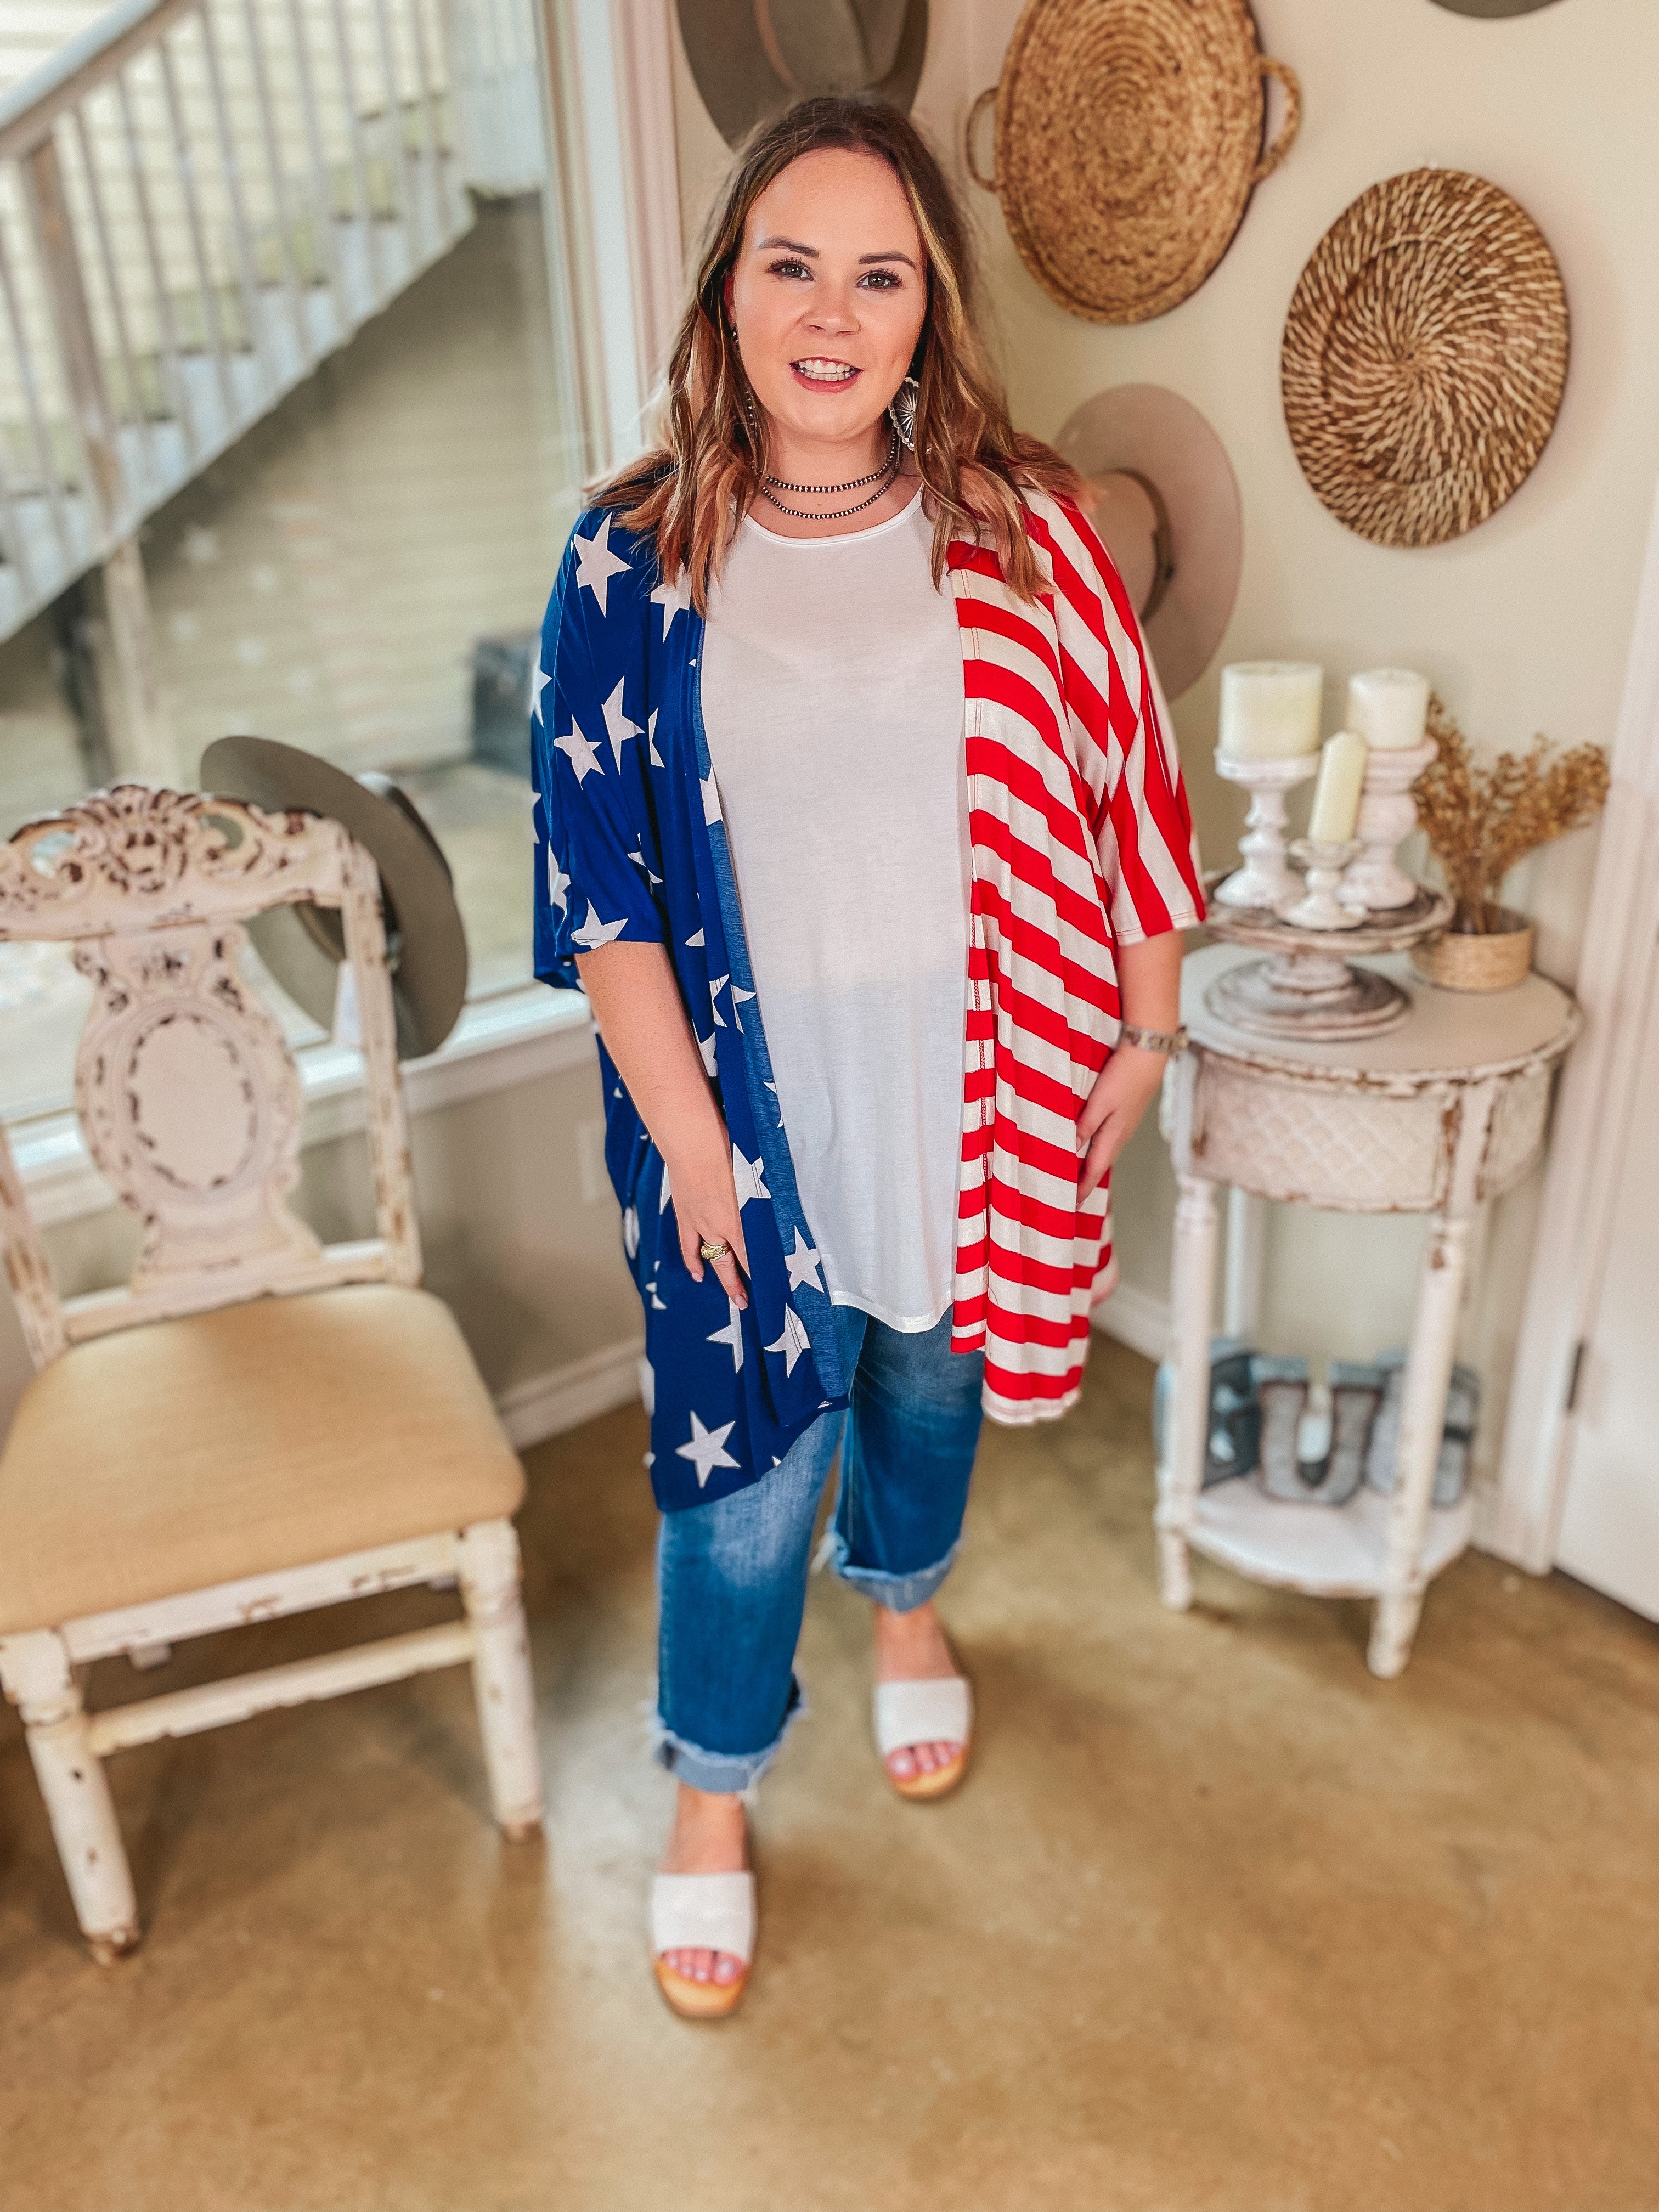 American Sweetheart Stars and Stripes Drop Sleeve Kimono in Red, White, and Blue - Giddy Up Glamour Boutique